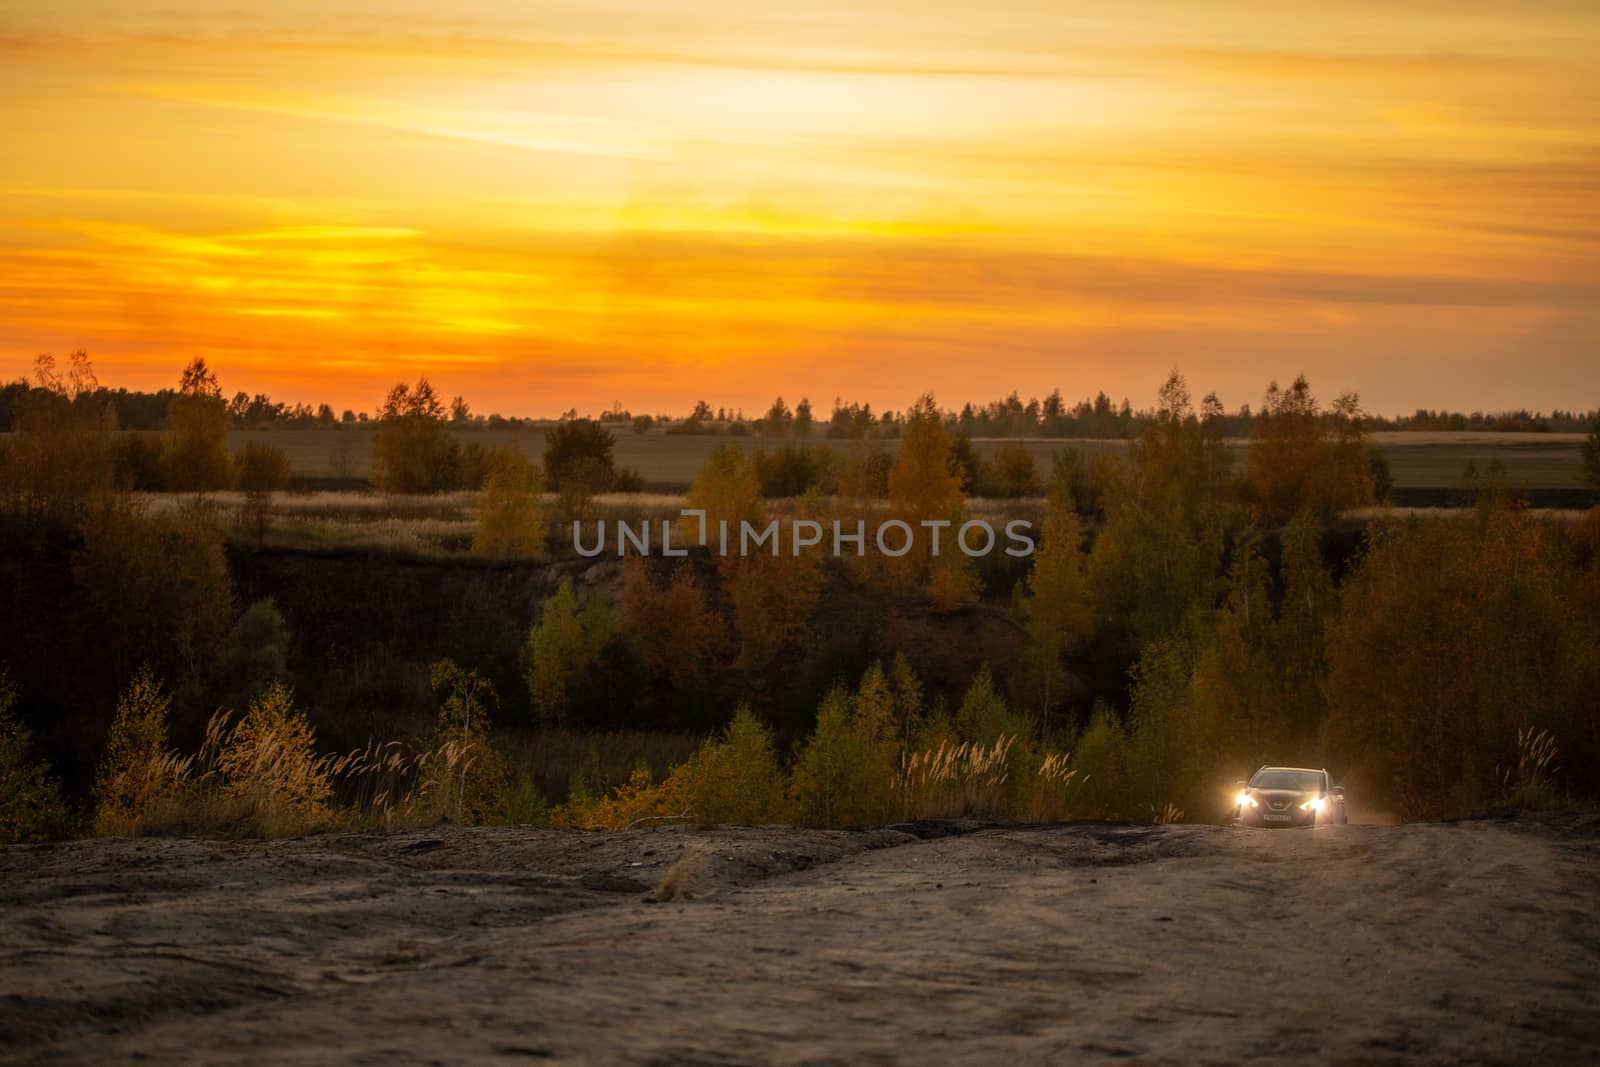 VOLKOVO, RUSSIA - OCTOBER 4, 2020: Blue Nissan Qashqai climbing up on dry dusty dirt road at autumn golden sunset offroad.